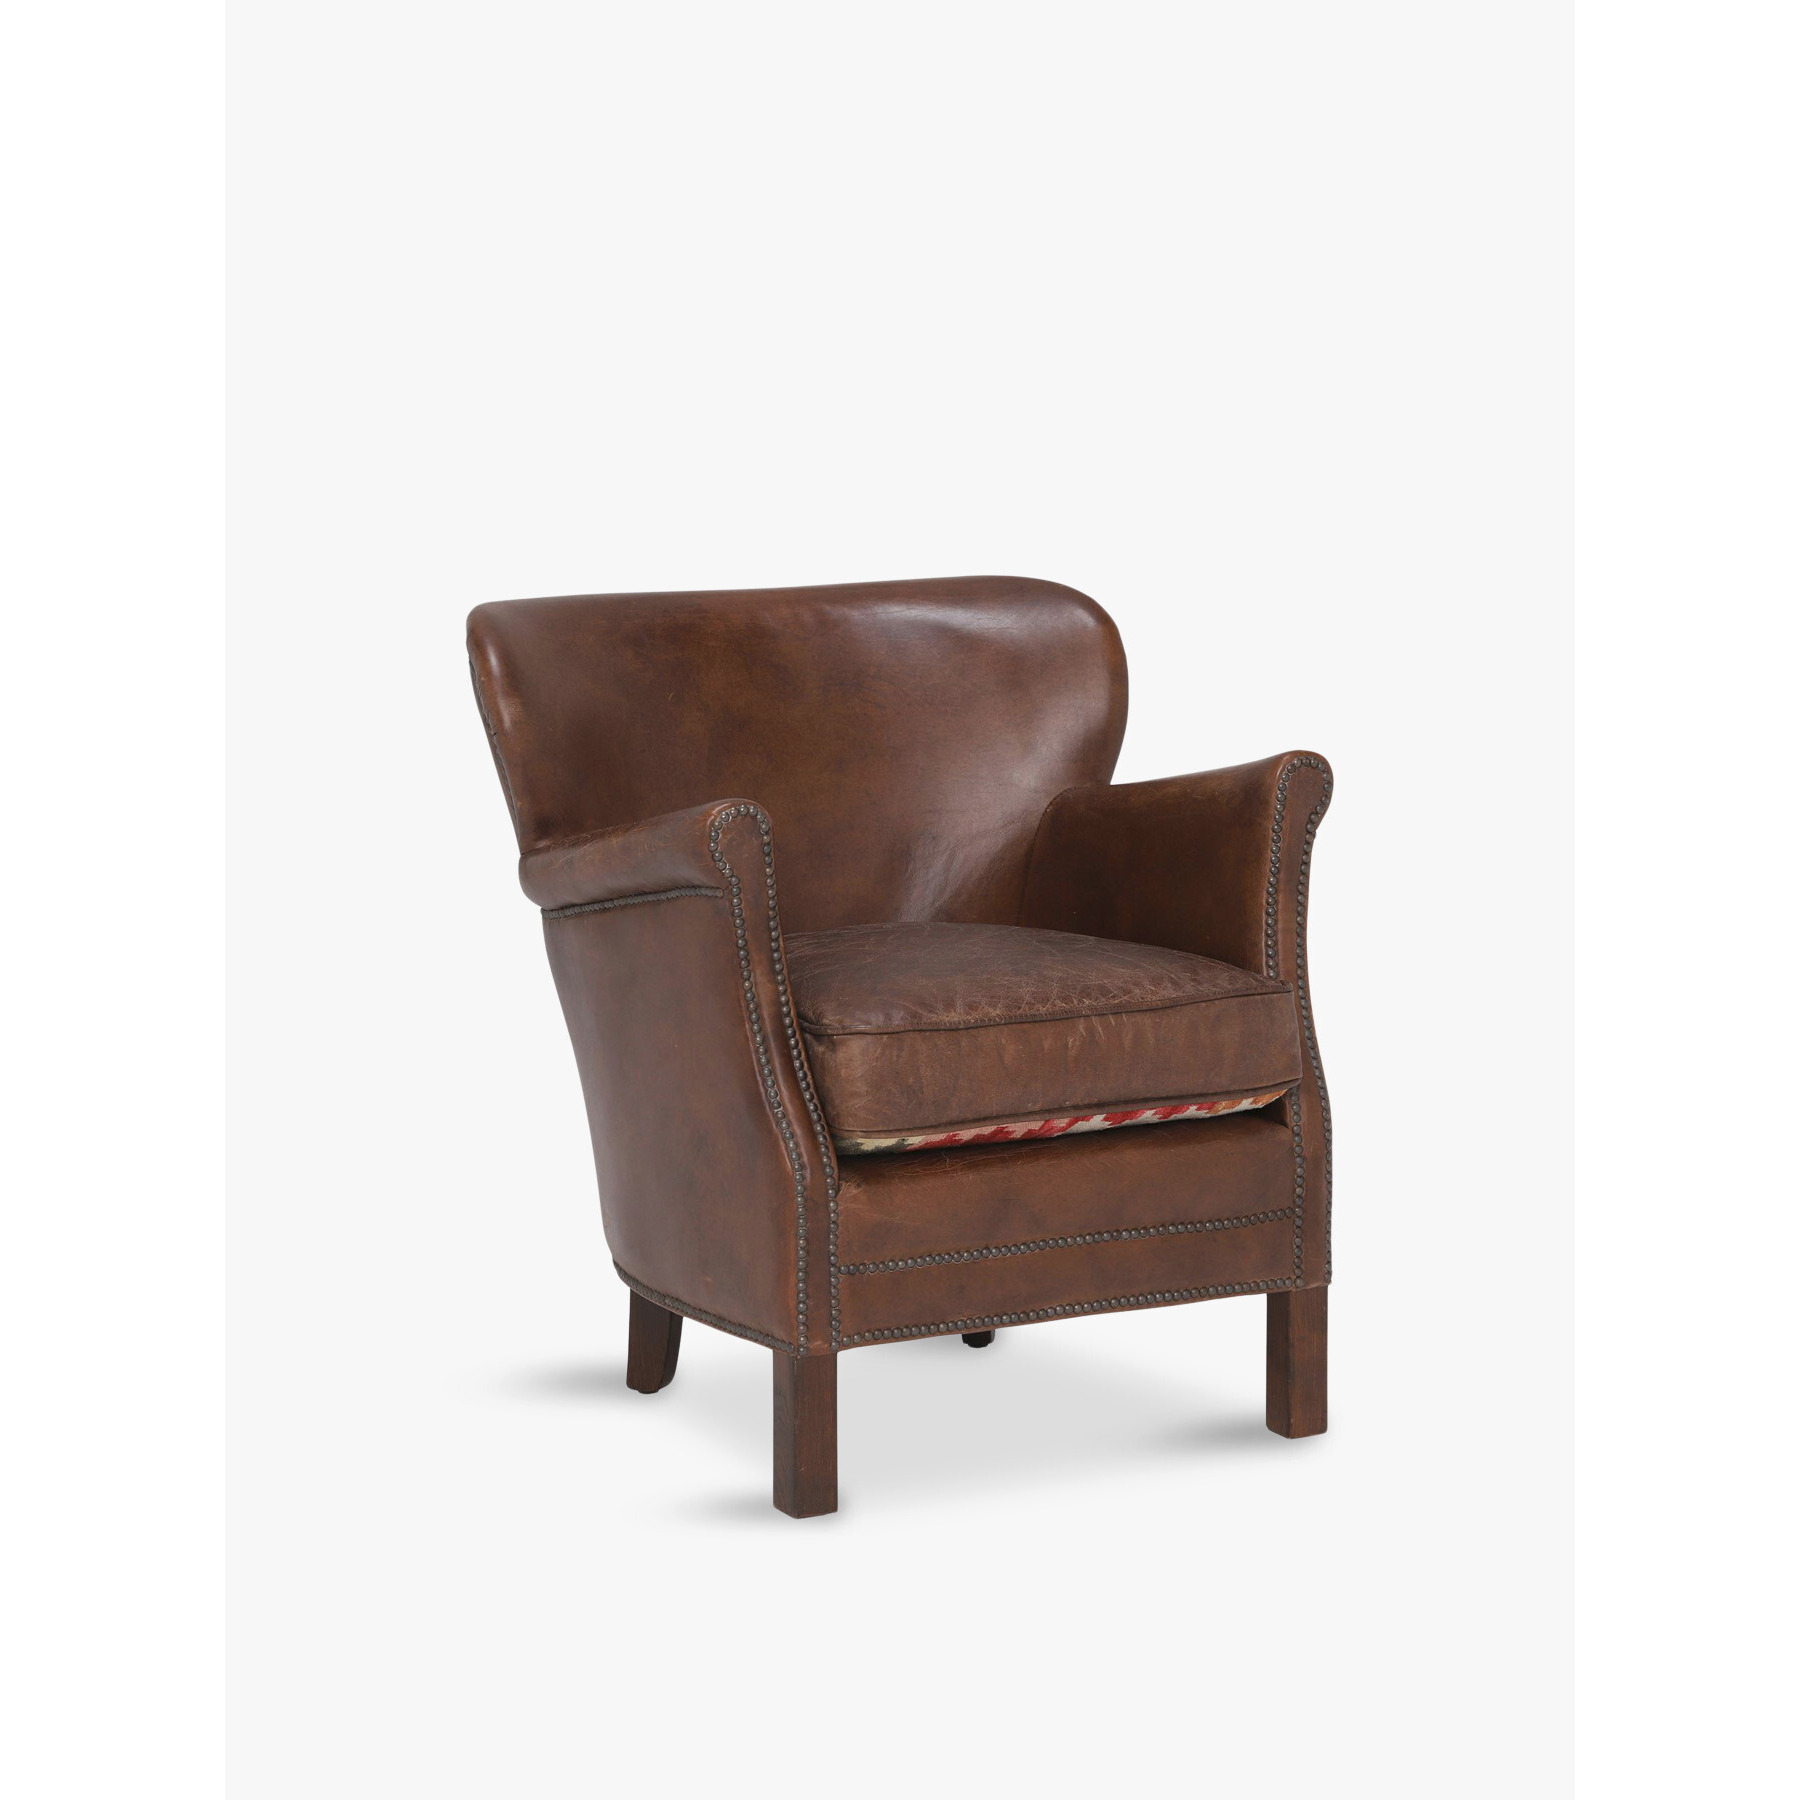 Barker and Stonehouse Cavendish Leather Armchair, Vintage Cigar Brown - image 1